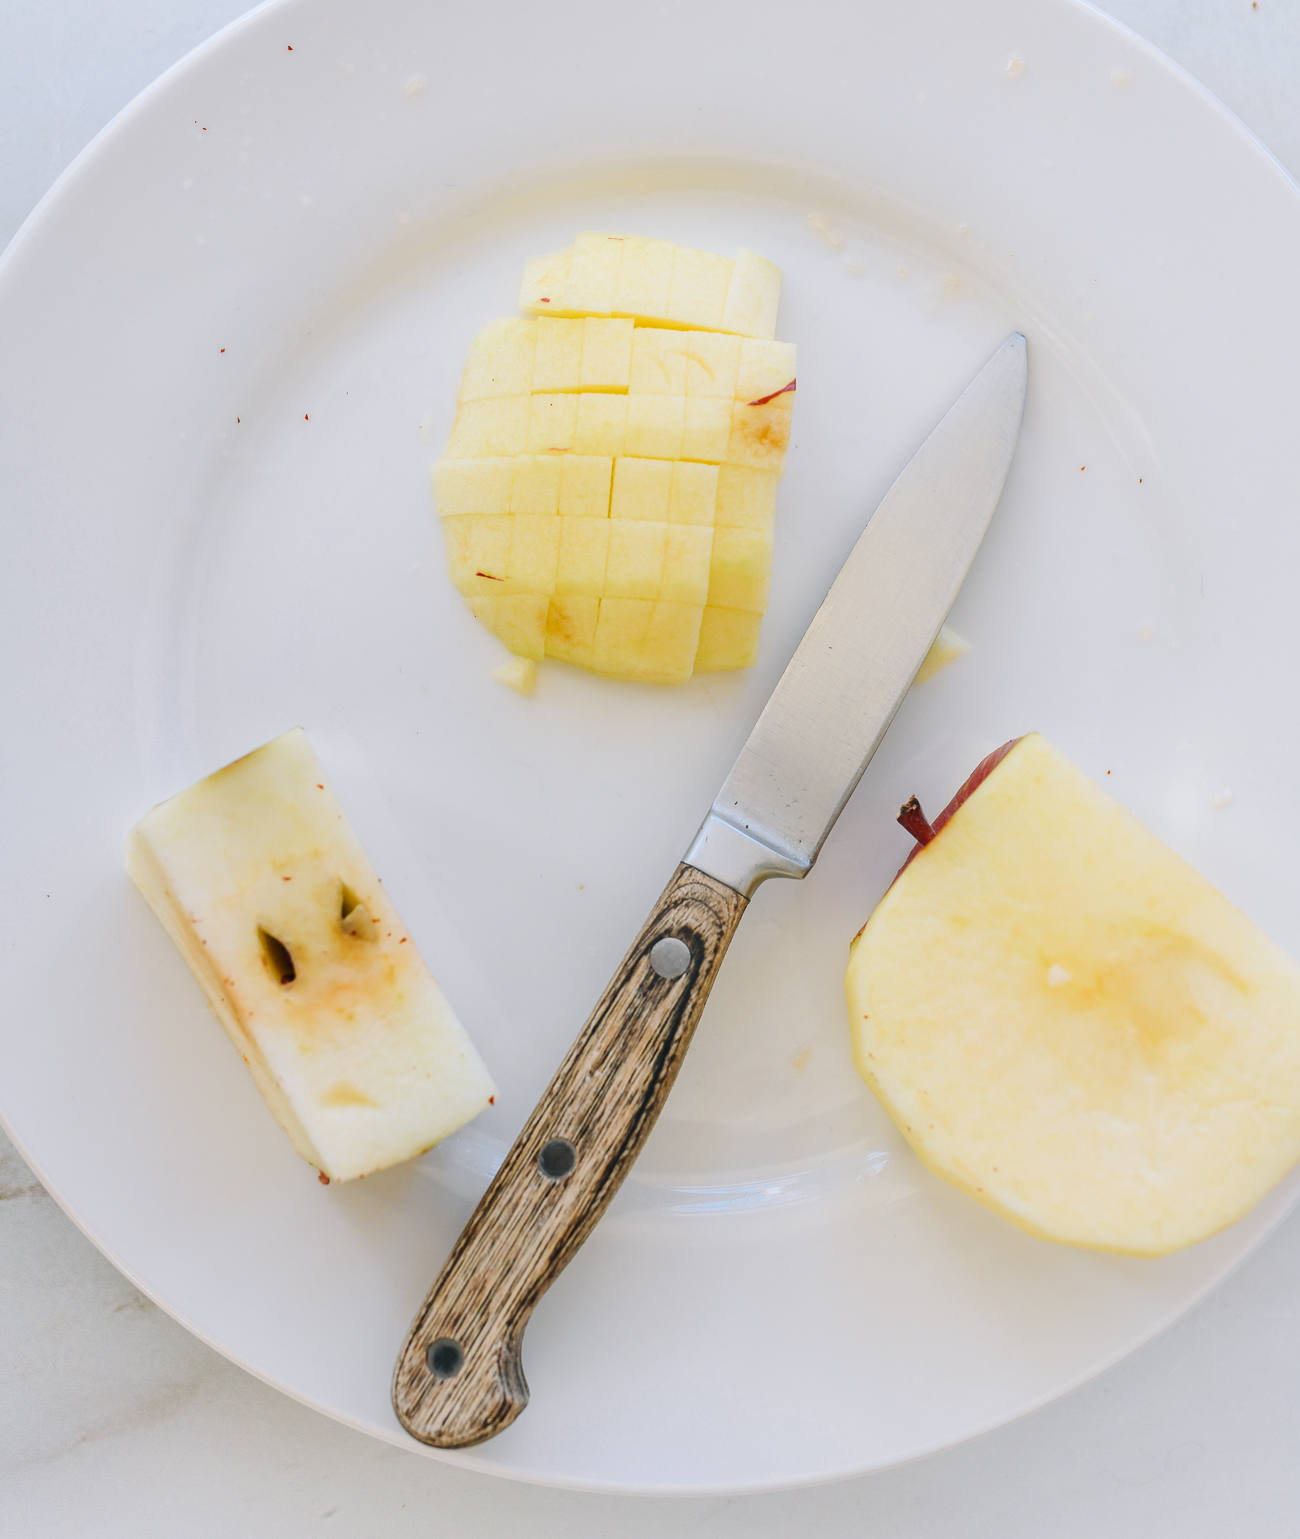 Cut an apple into cubes on a white plate